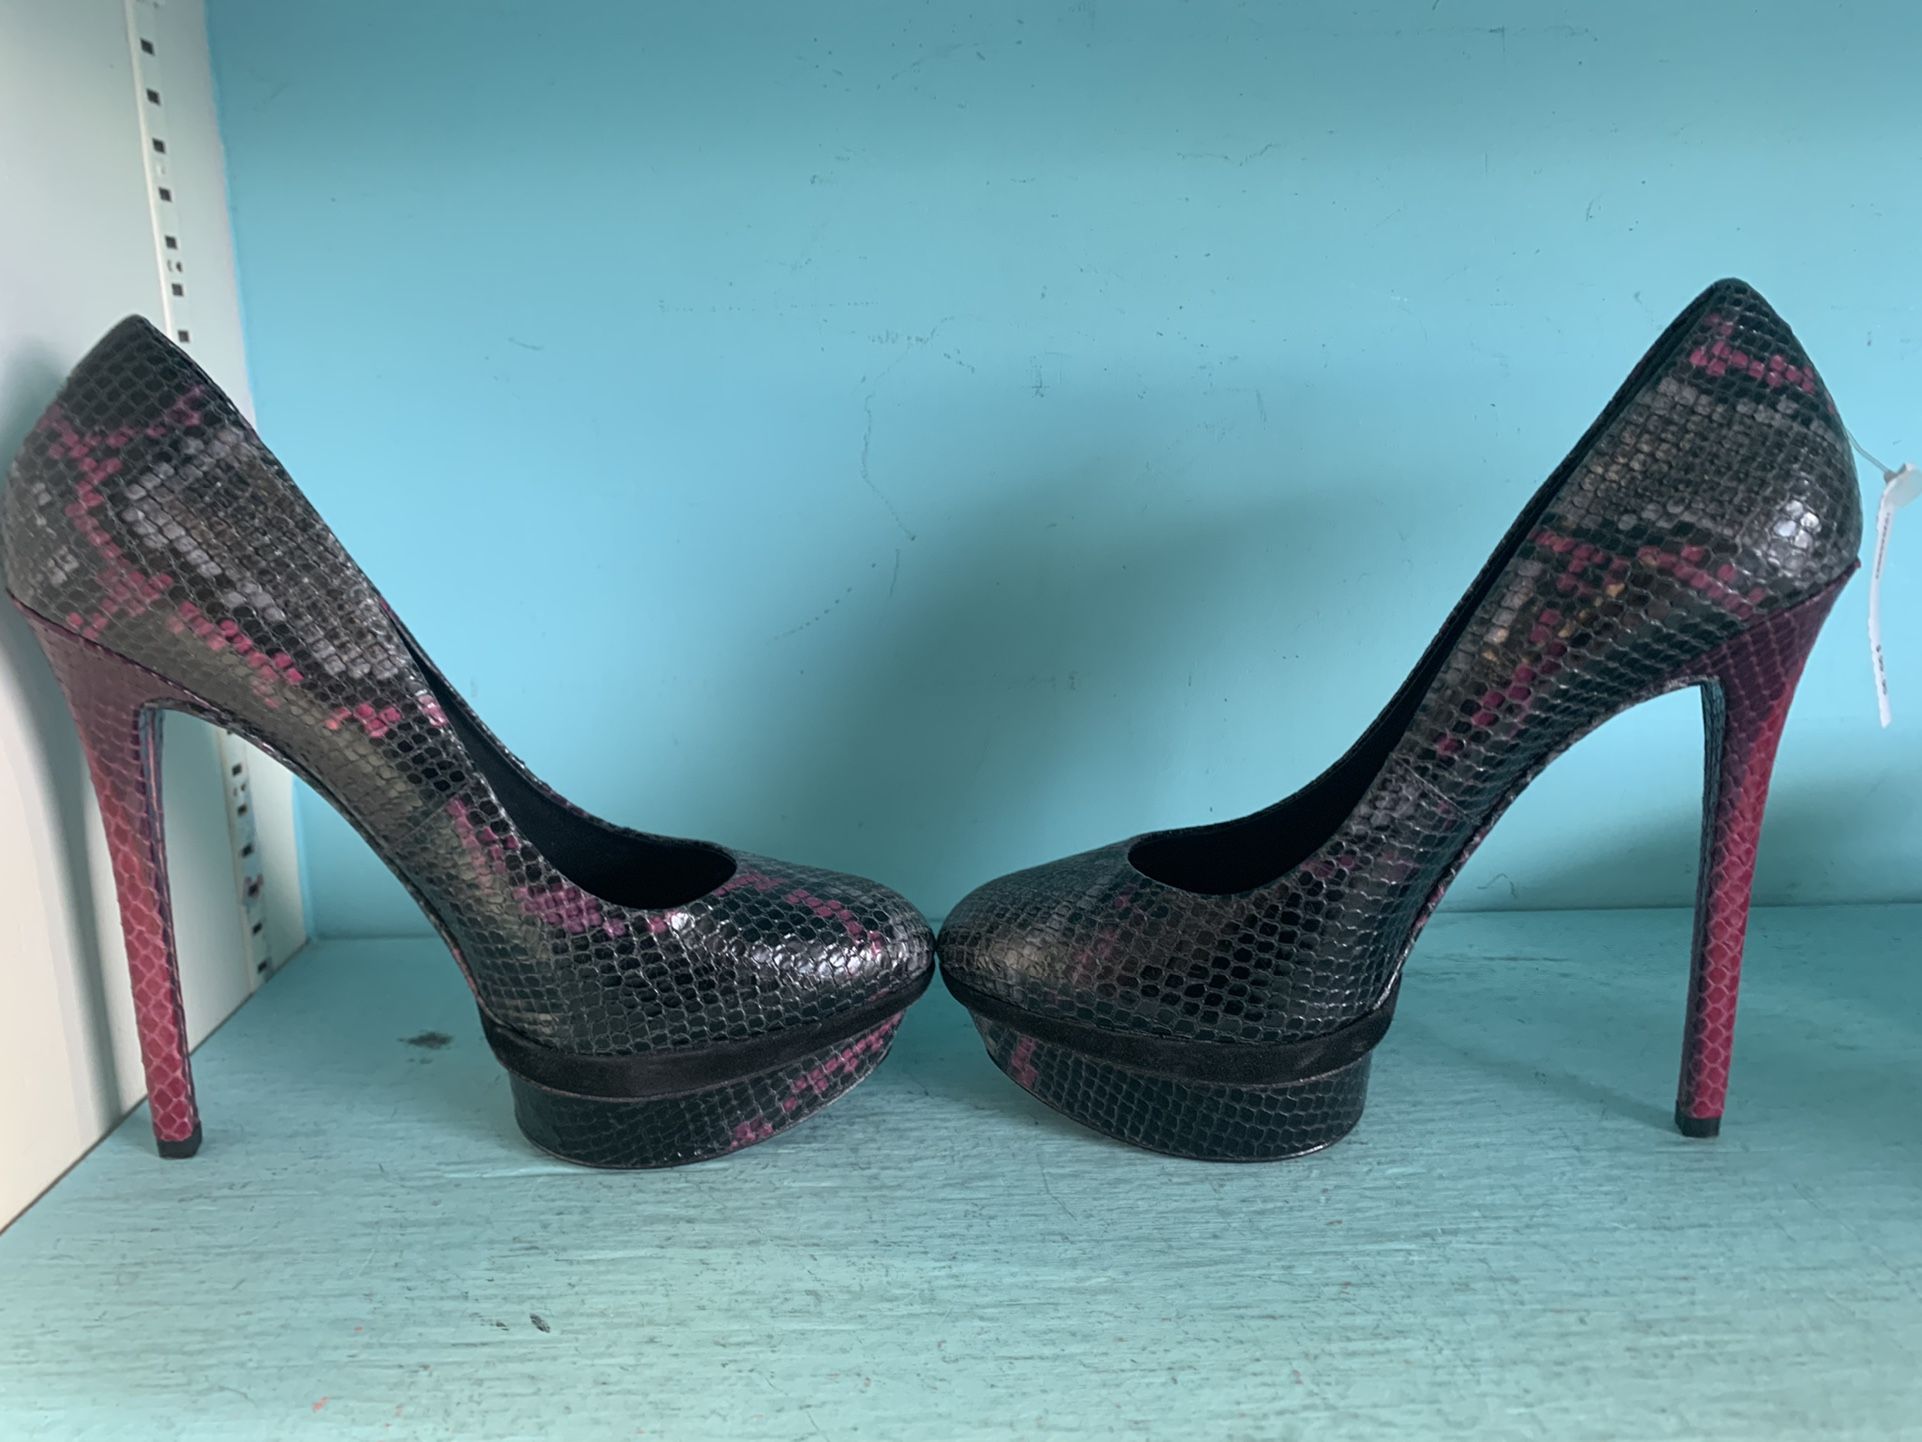 Brand new Brian Atwood pink and gray snake print heels. 